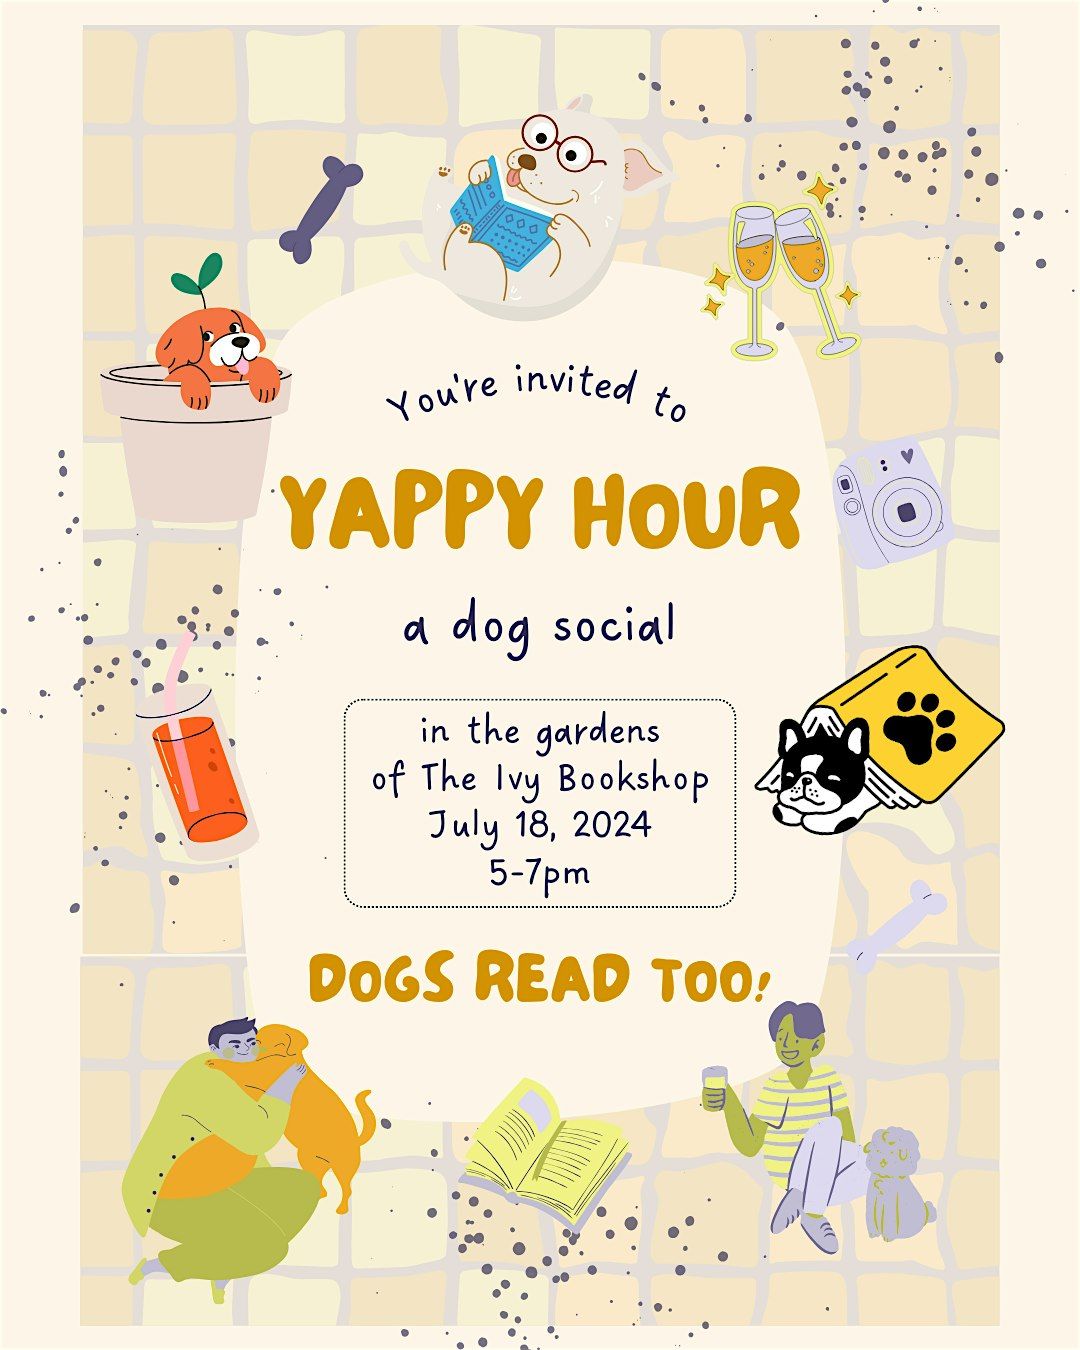 Yappy Hour: A Dog Social (Dogs Read Too!)